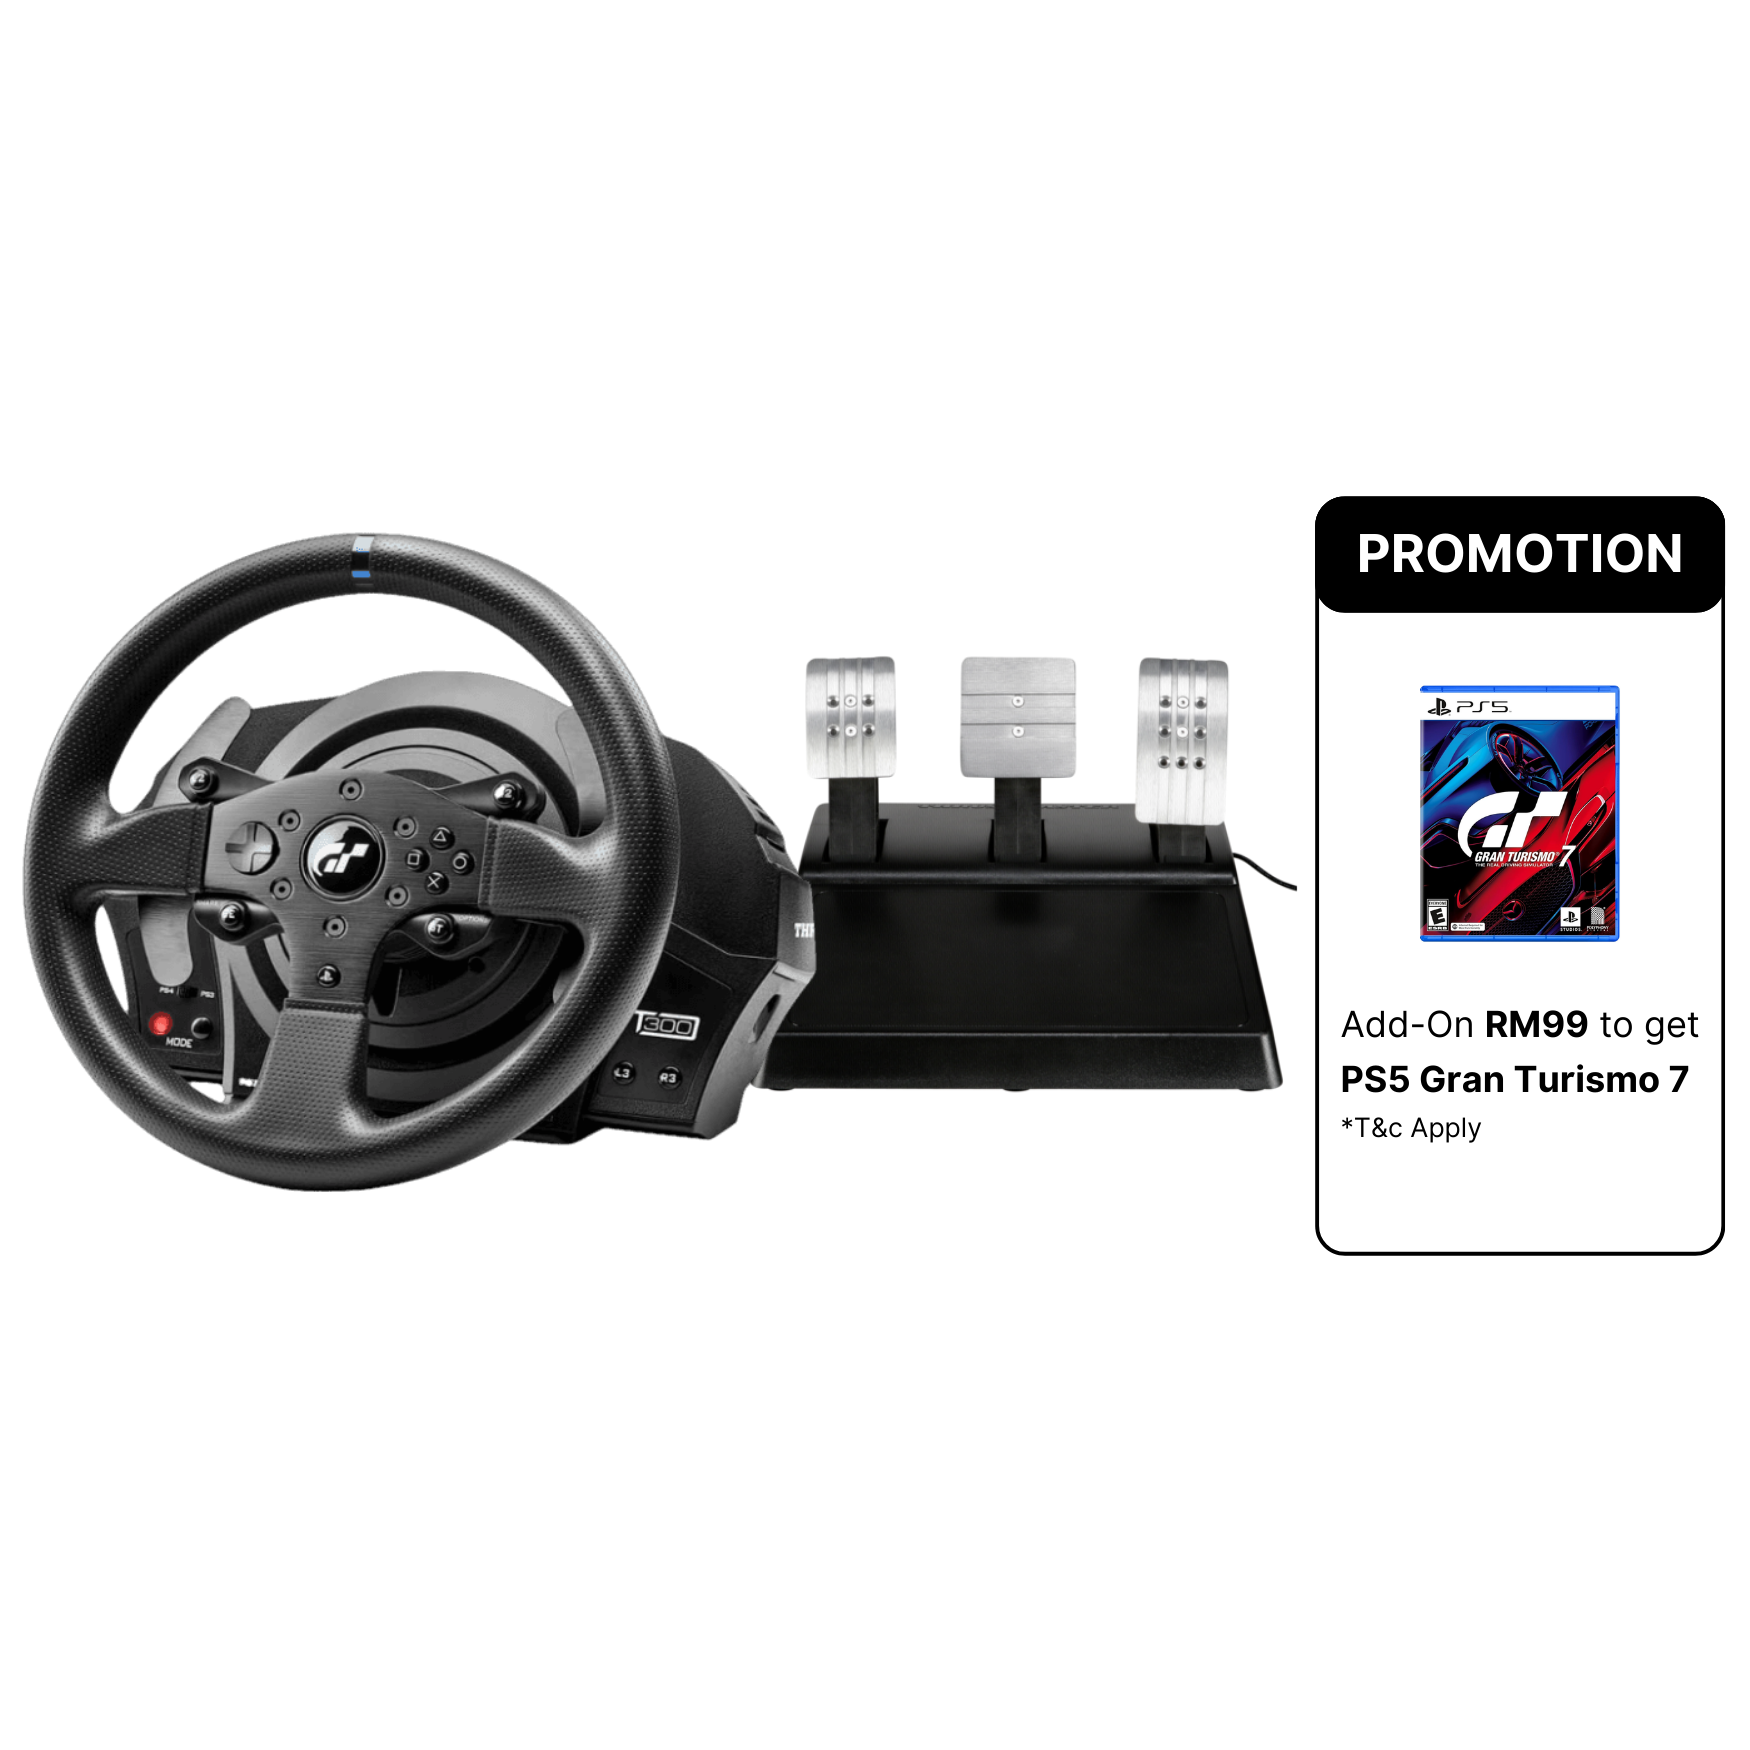 https://www.tmt.my/data/editor/sc-product/2983/thrustmaster_t300_promo_latest.png